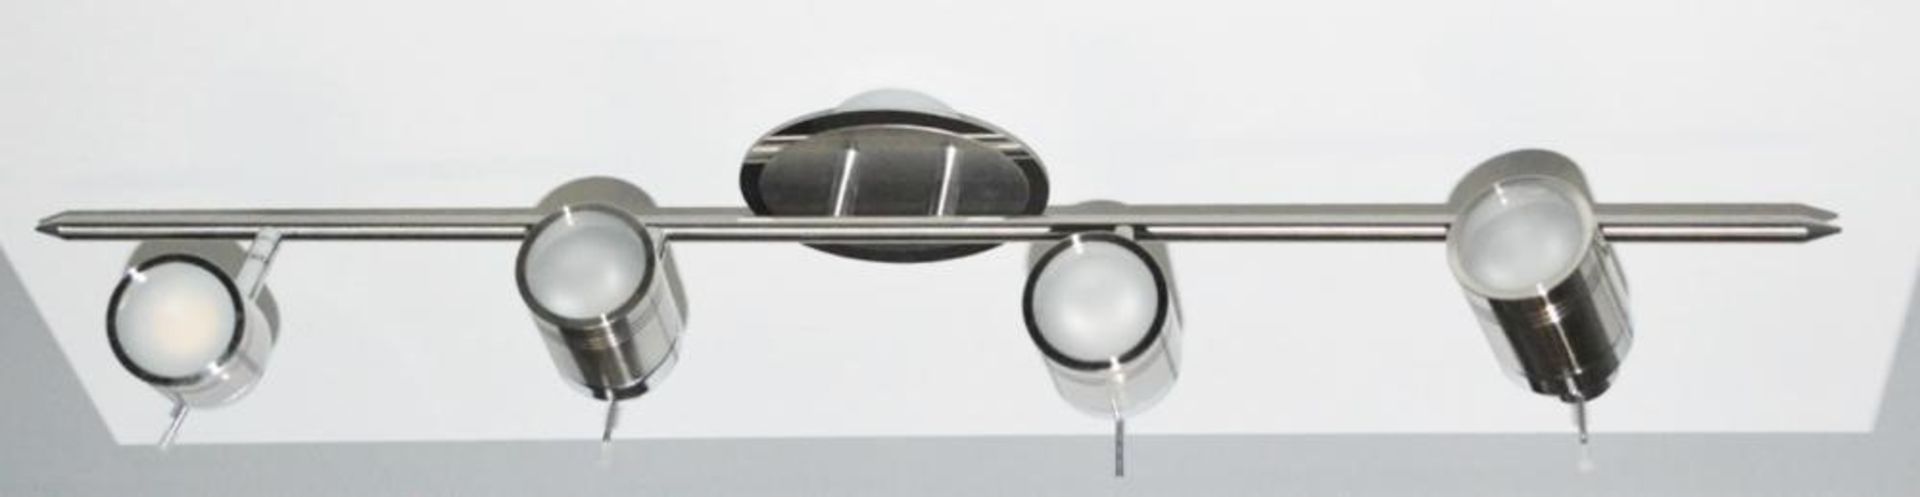 1 x Tauros Four Bar Ceiling Spot Light - Polished Chrome With Smoked Glass Diffusers - Ex Display St - Image 4 of 4